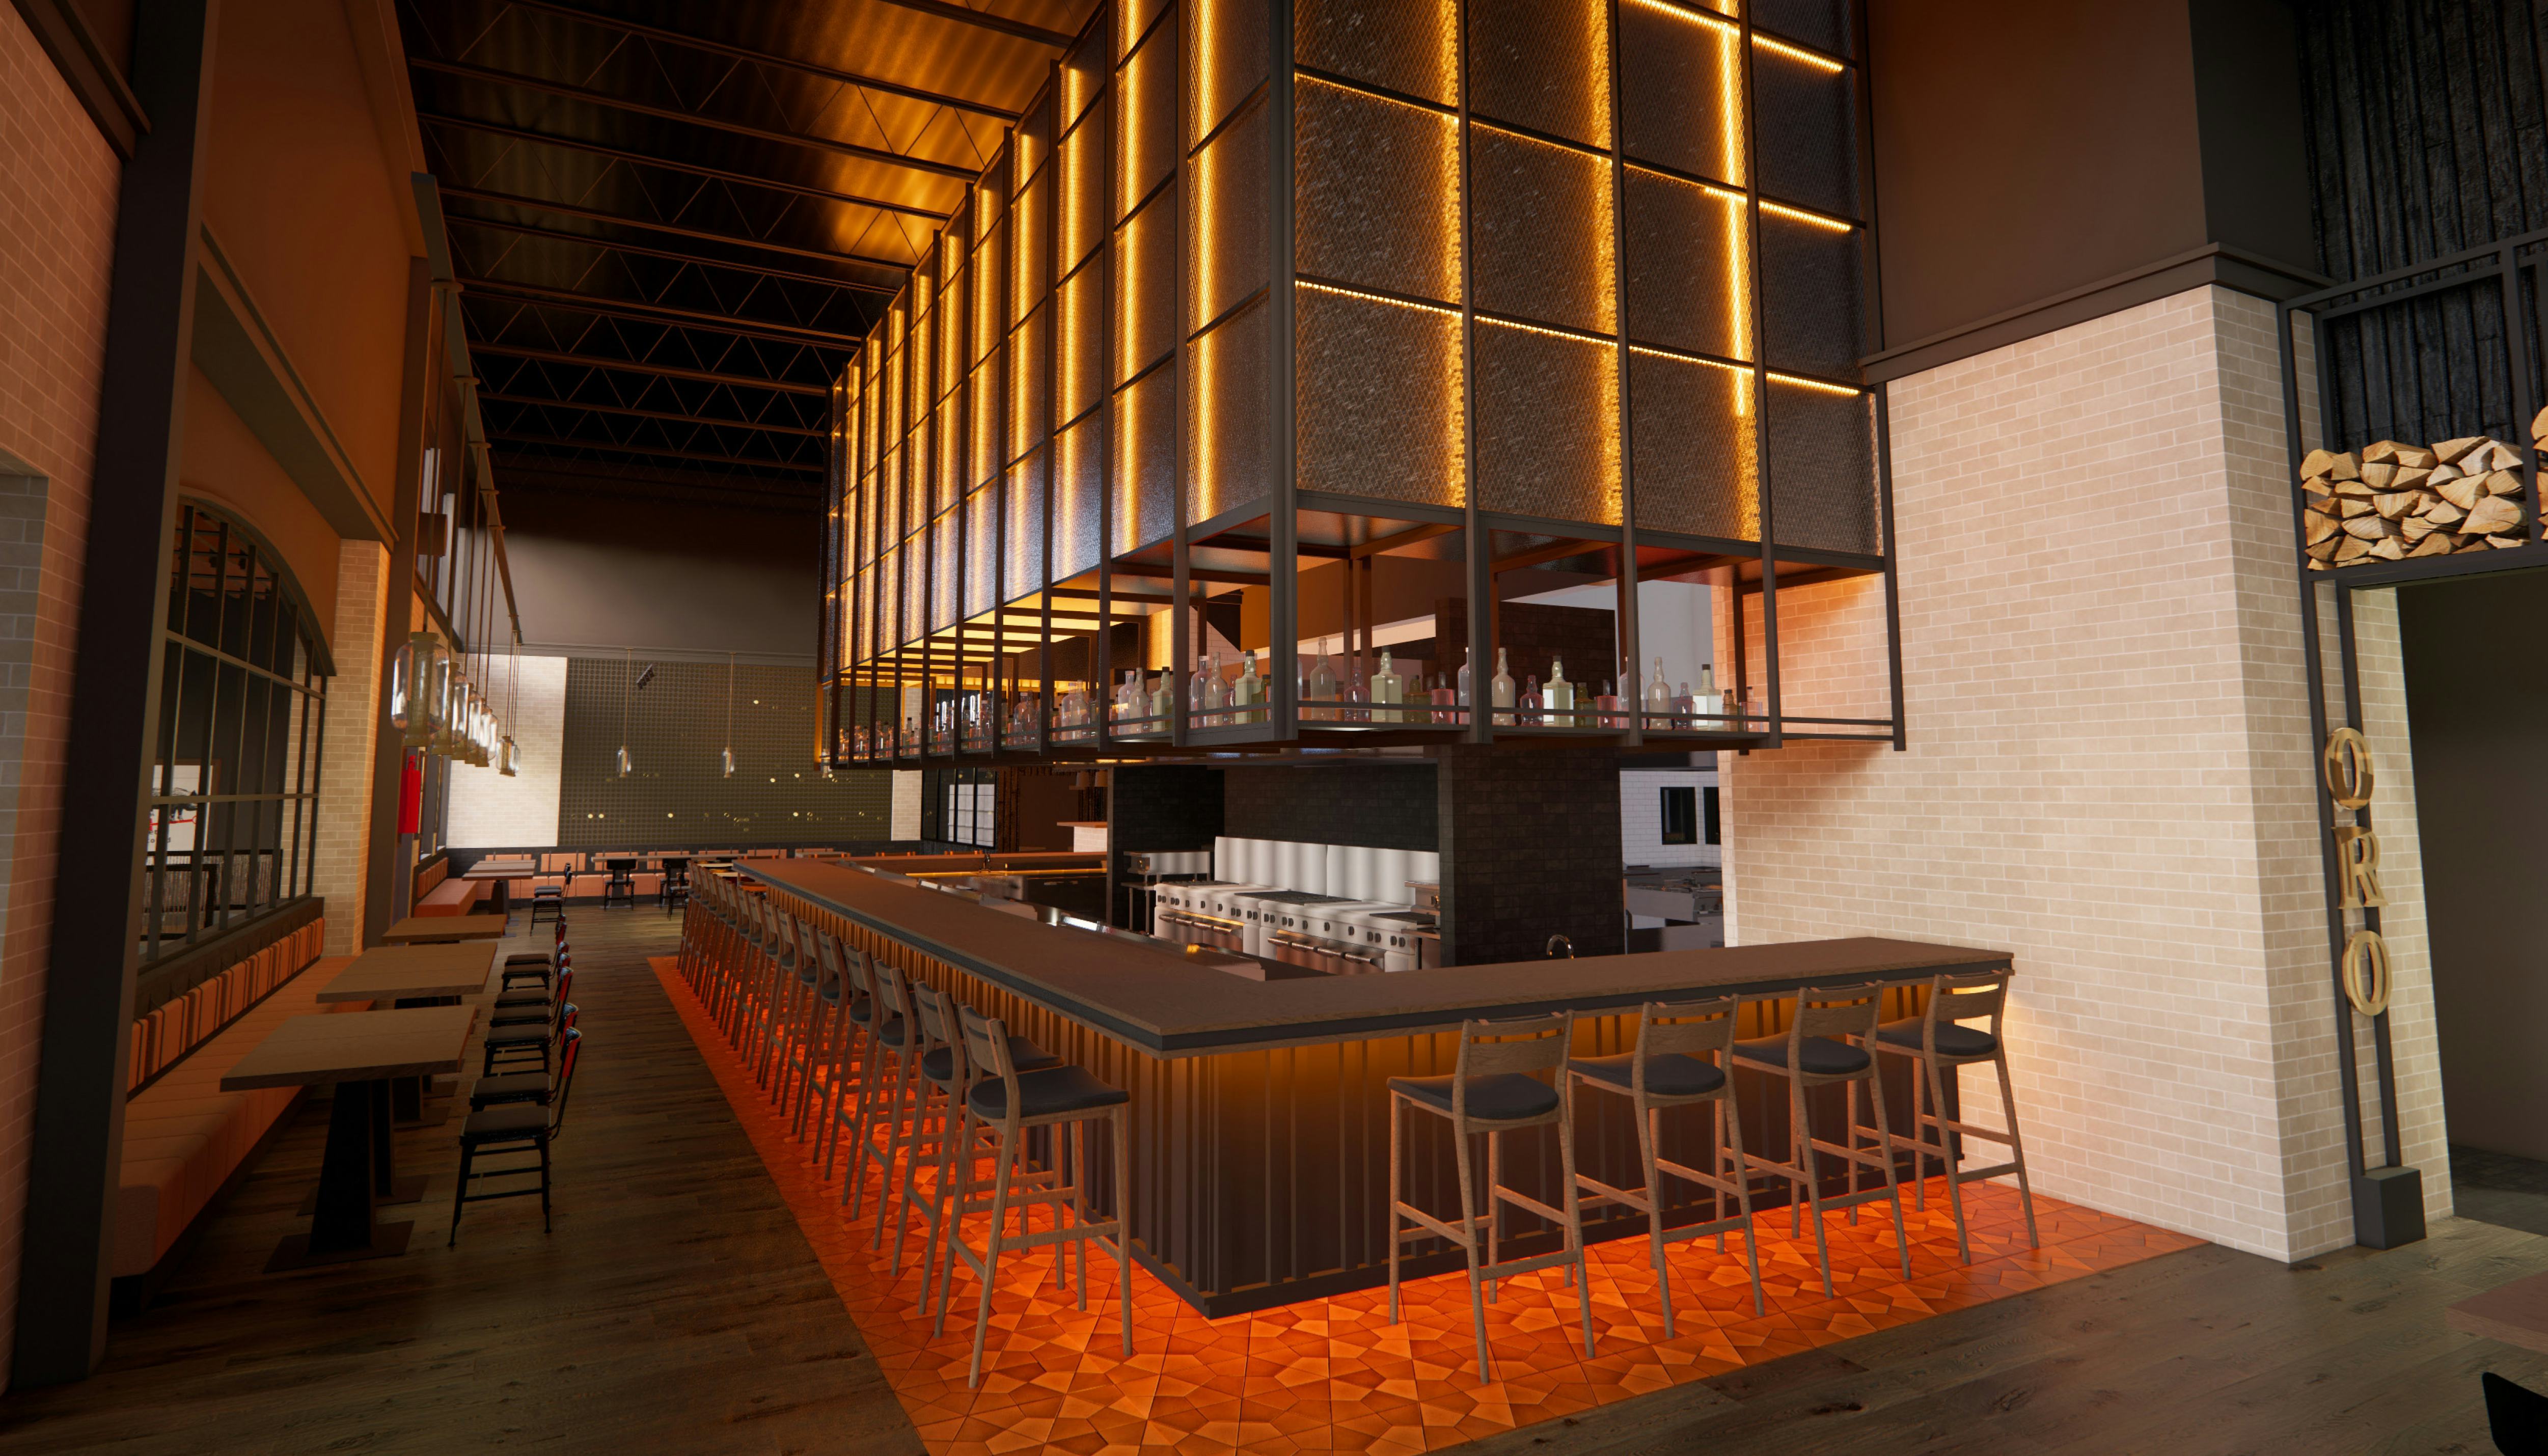 A rendering of the inside of the future Pyro restaurant. A long, wrap-around bar, with orange underlighting, warm yellow lighting above, and chopped wood decor.